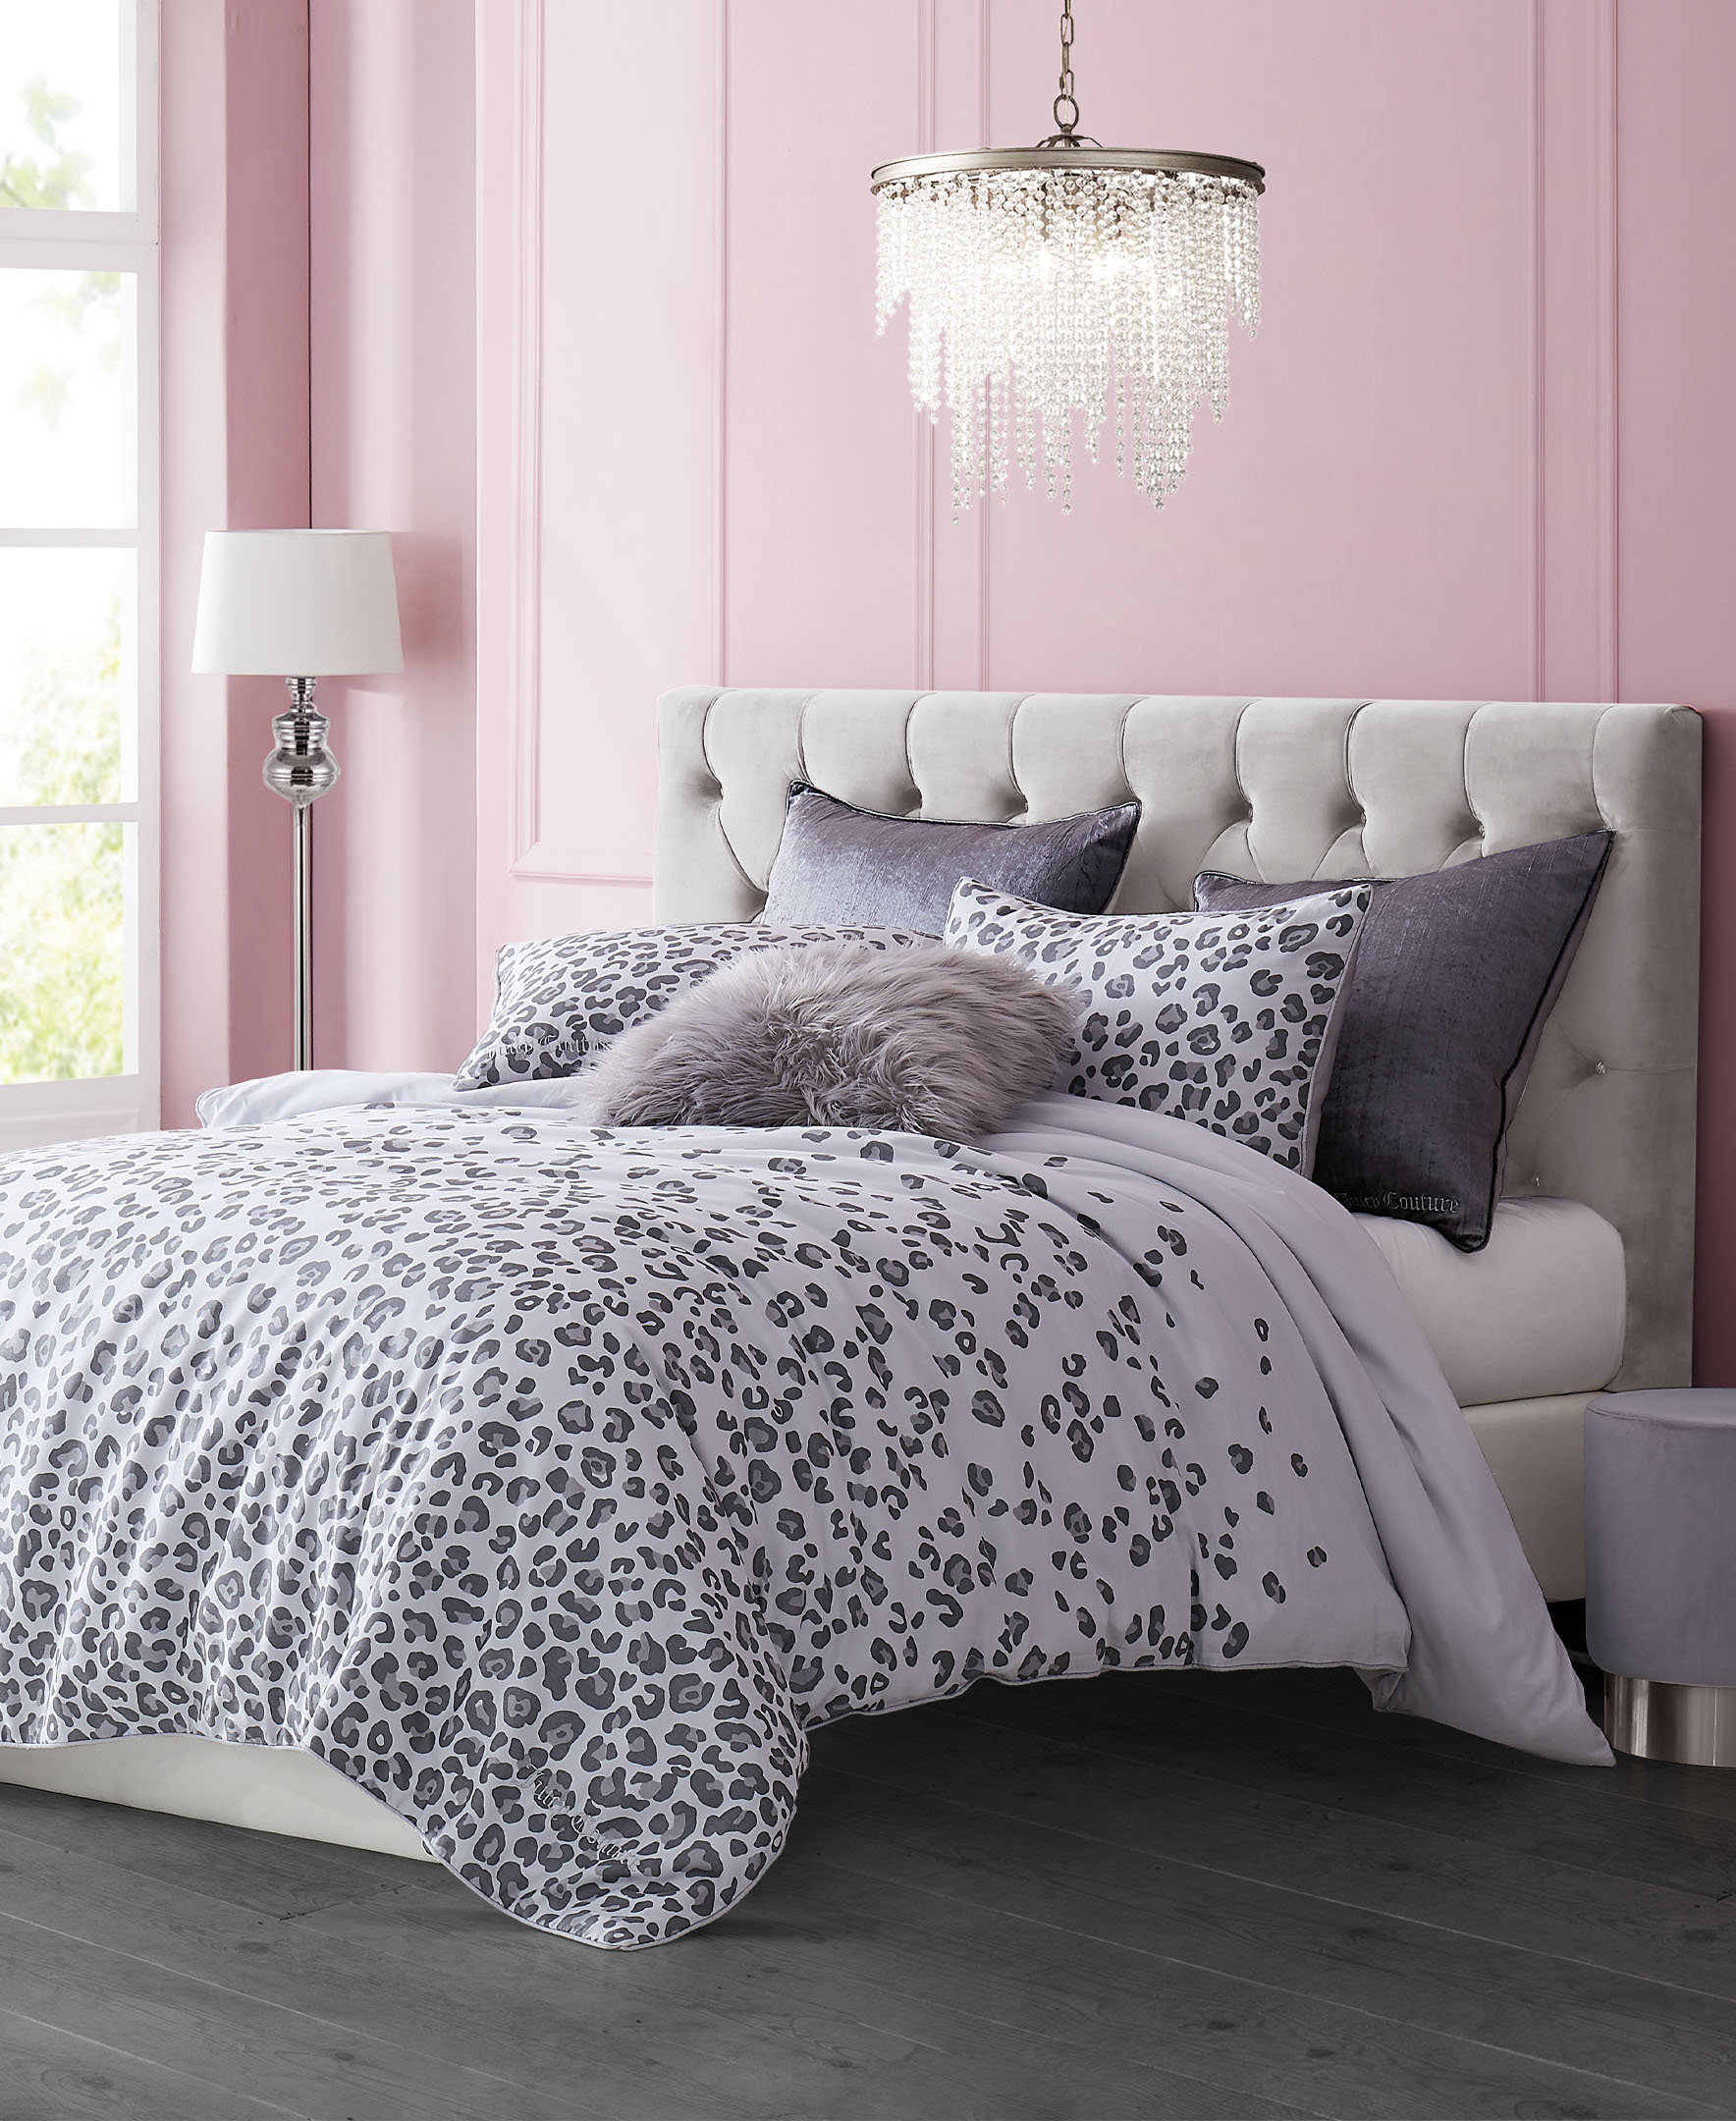 Juicy Couture Pearl Leopard Comforter Sets & Reviews